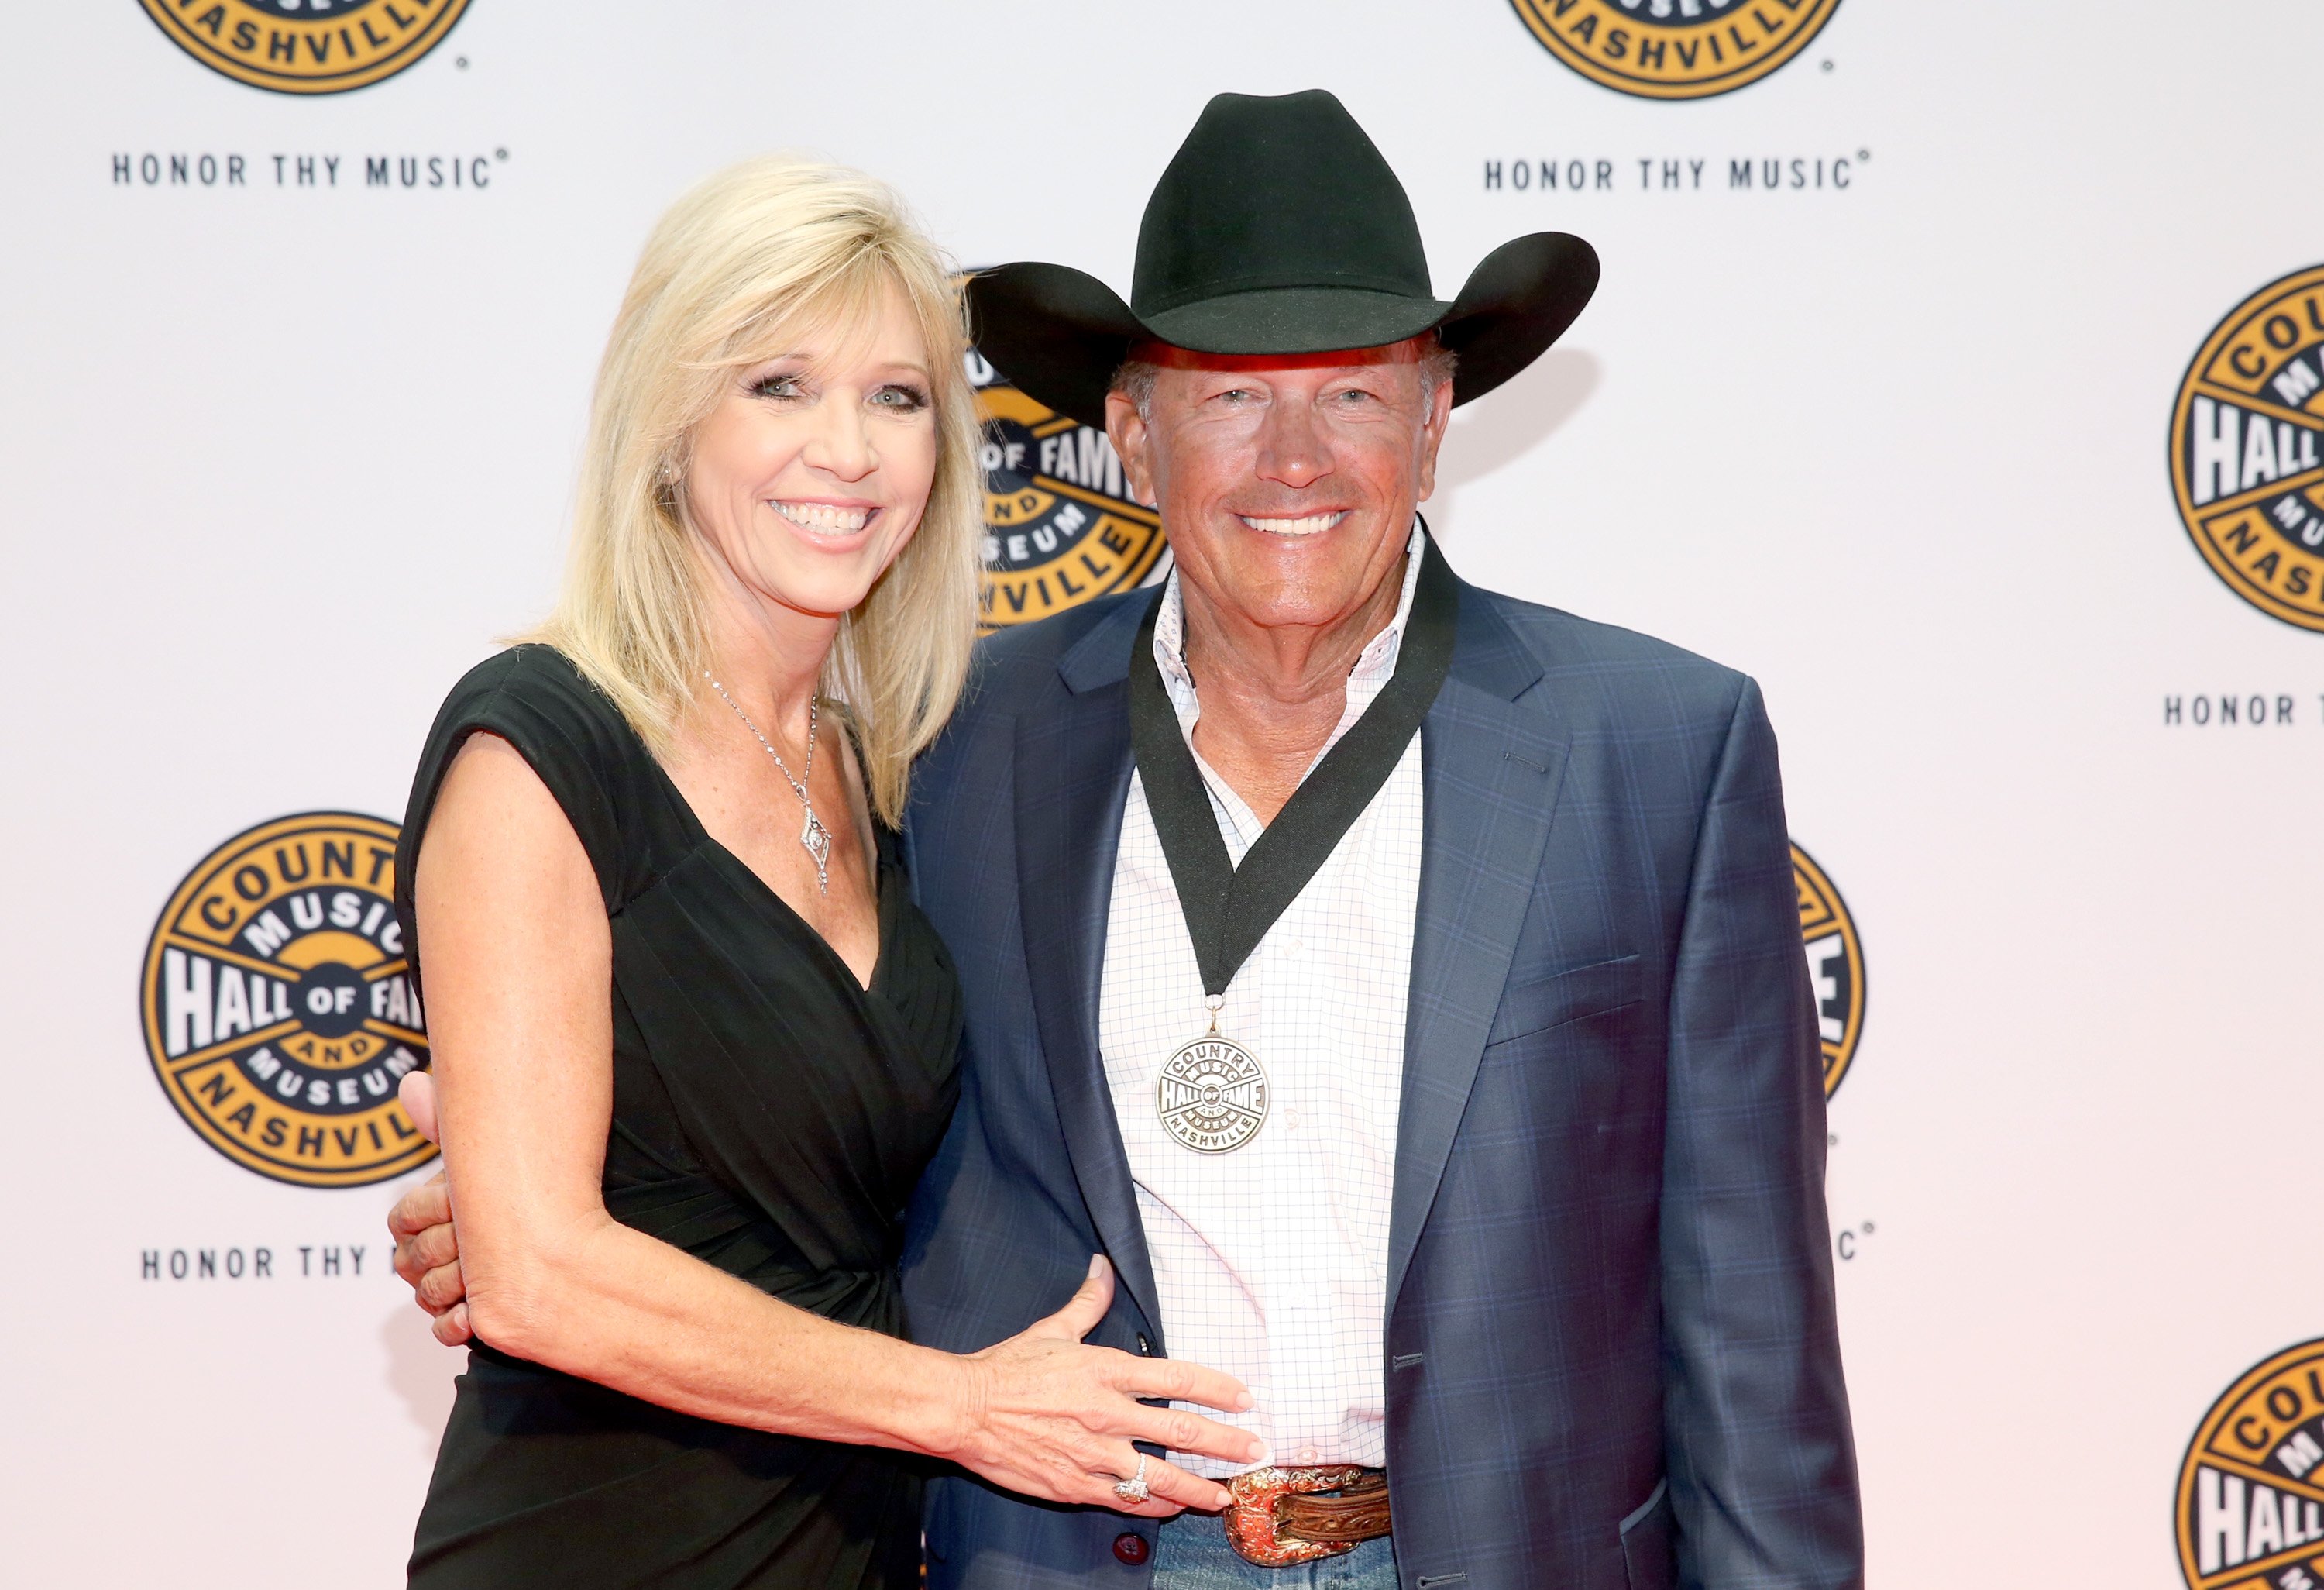 Norma and George Strait at the Medallion Ceremony at Country Music Hall of Fame and Museum on October 22, 2017, in Nashville, Tennessee | Source: Getty Images